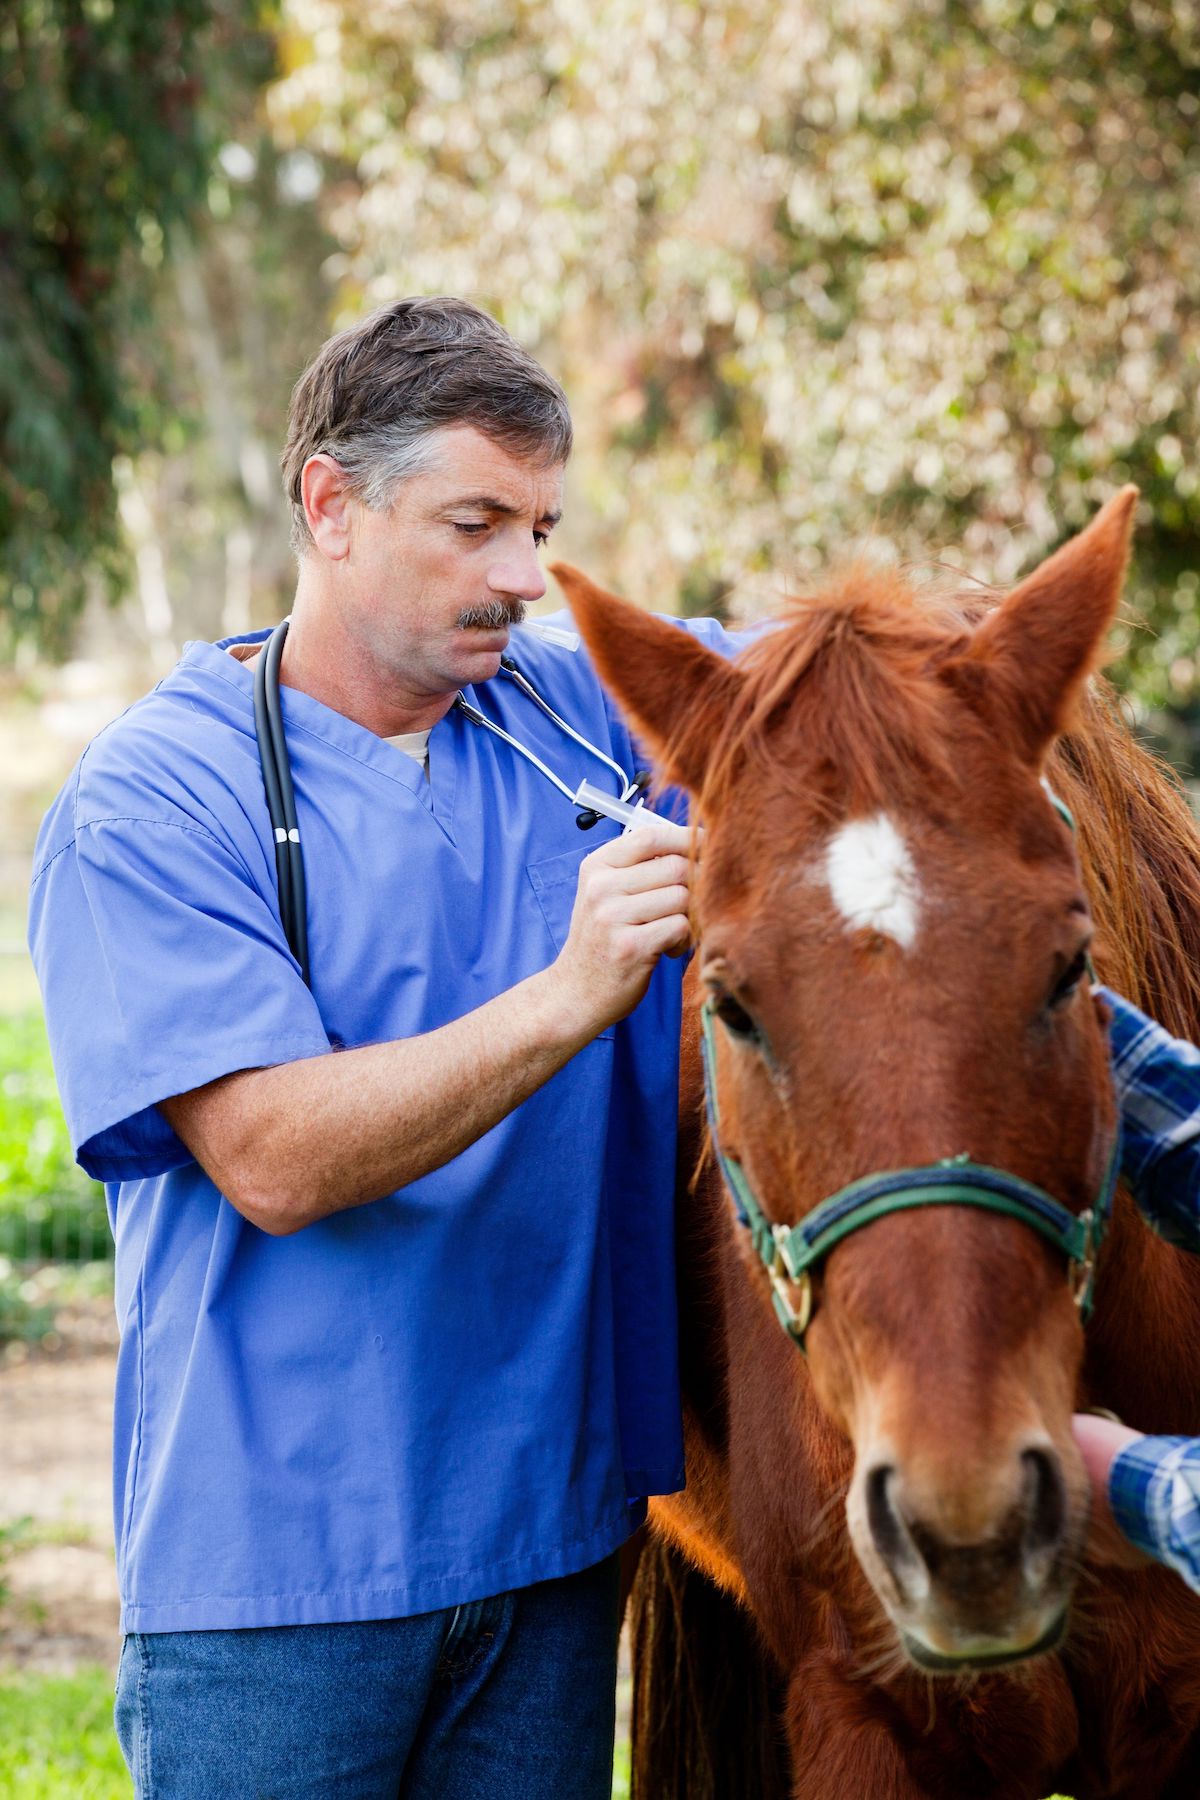 Veterinarian giving a horse injection